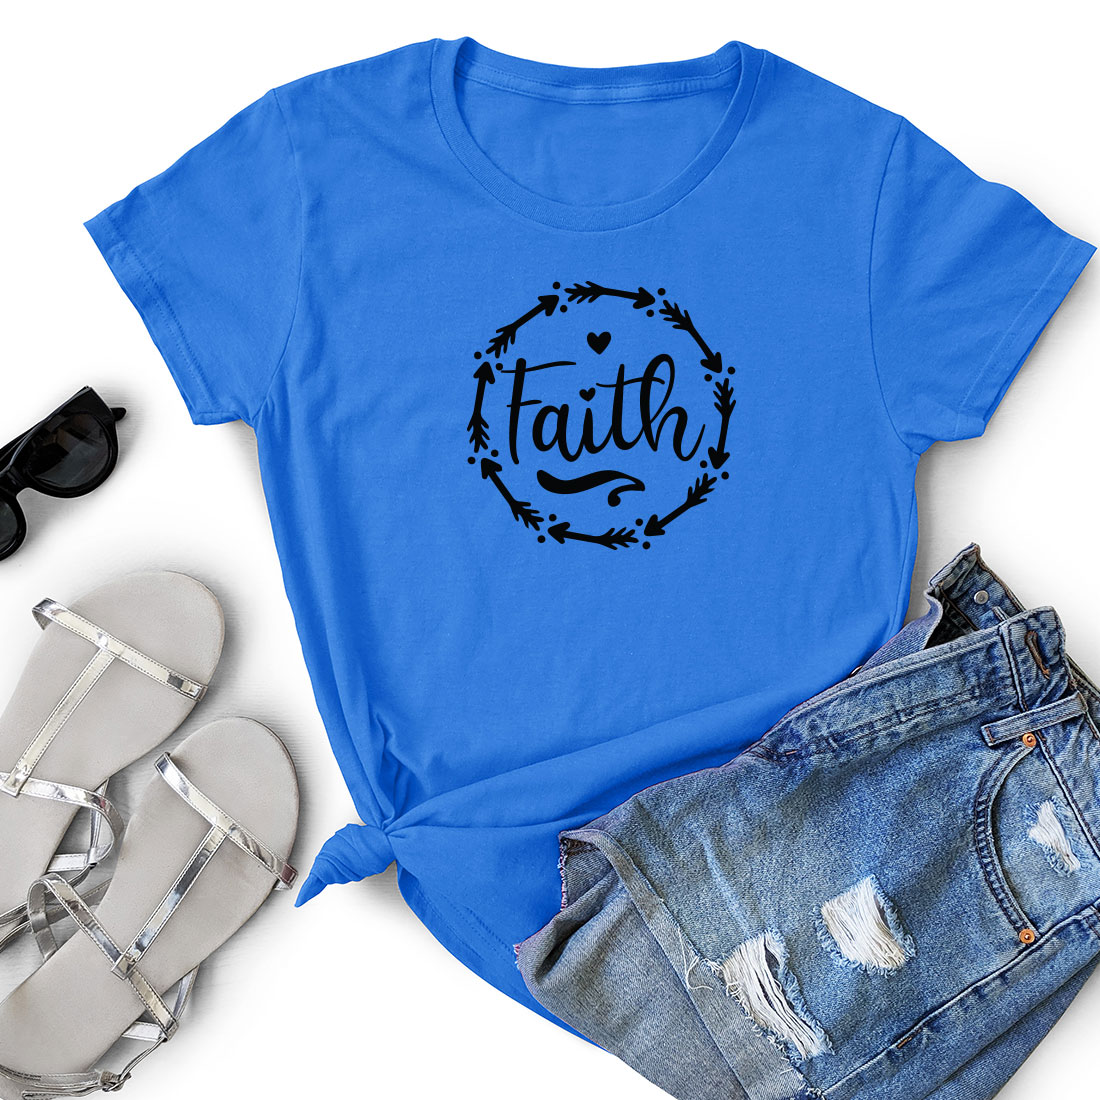 T - shirt with the word faith on it next to a pair of shorts.